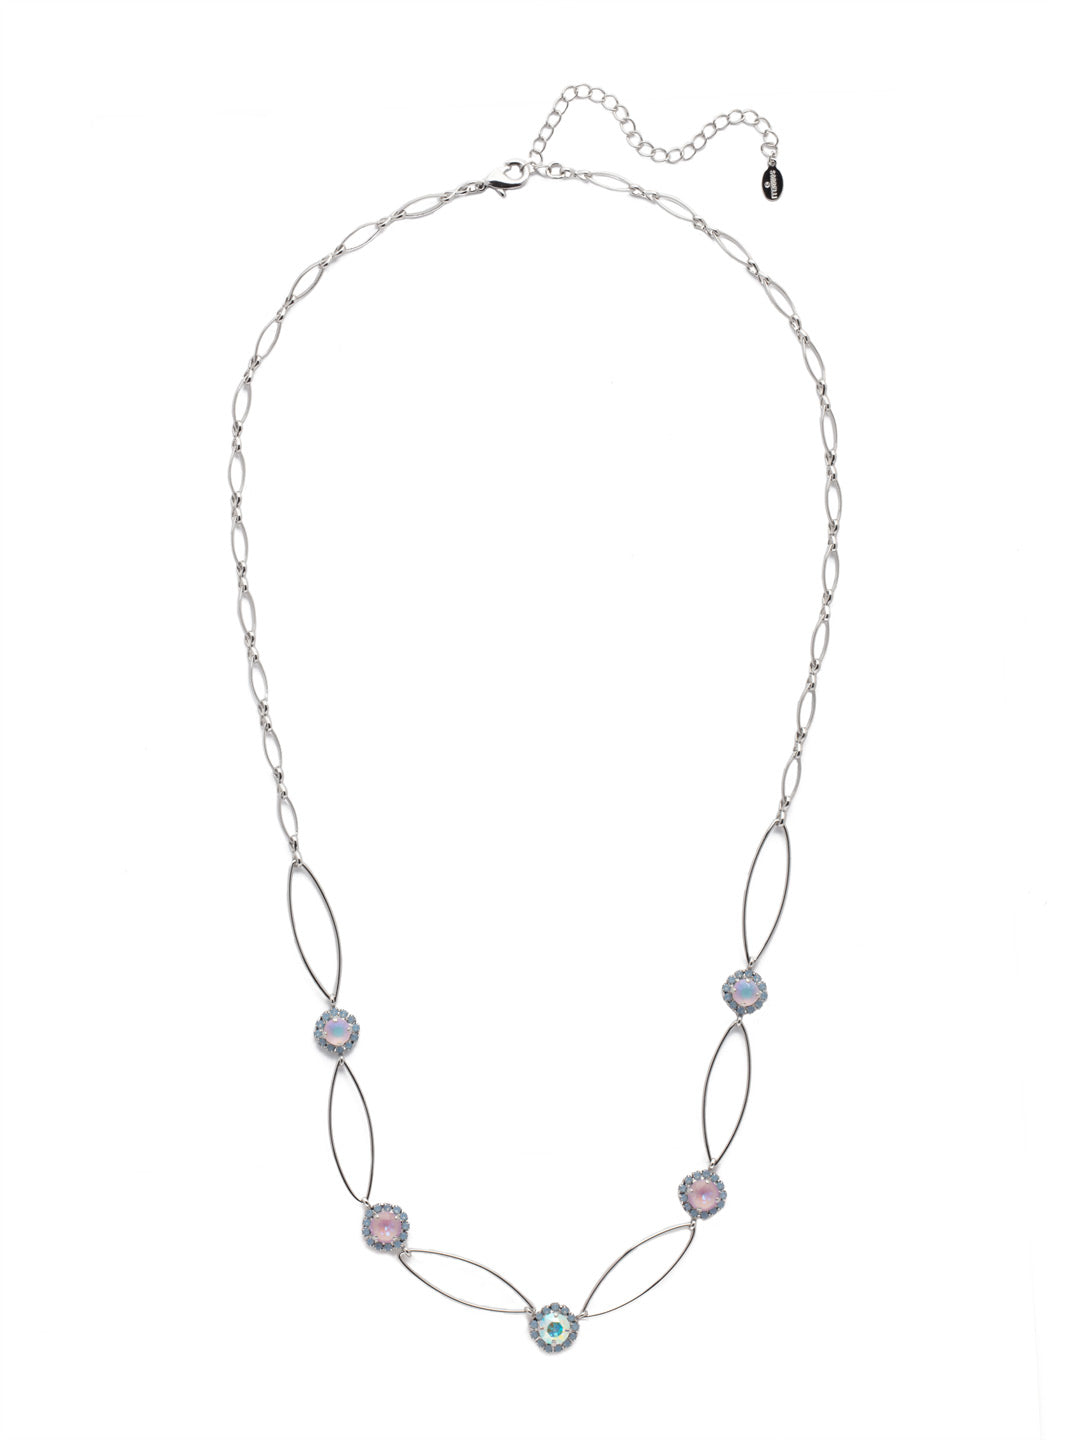 Haute Halo Oval Long Necklace - NEY13PDCCC - <p>Layer on the Haute Halo Oval Long Necklace to create a trendy look! Alternating metal tone oblong hoops and halo set crystals hang perfectly from an adjustable chain with a lobster claw closure. From Sorrelli's Cotton Candy Clouds collection in our Palladium finish.</p>